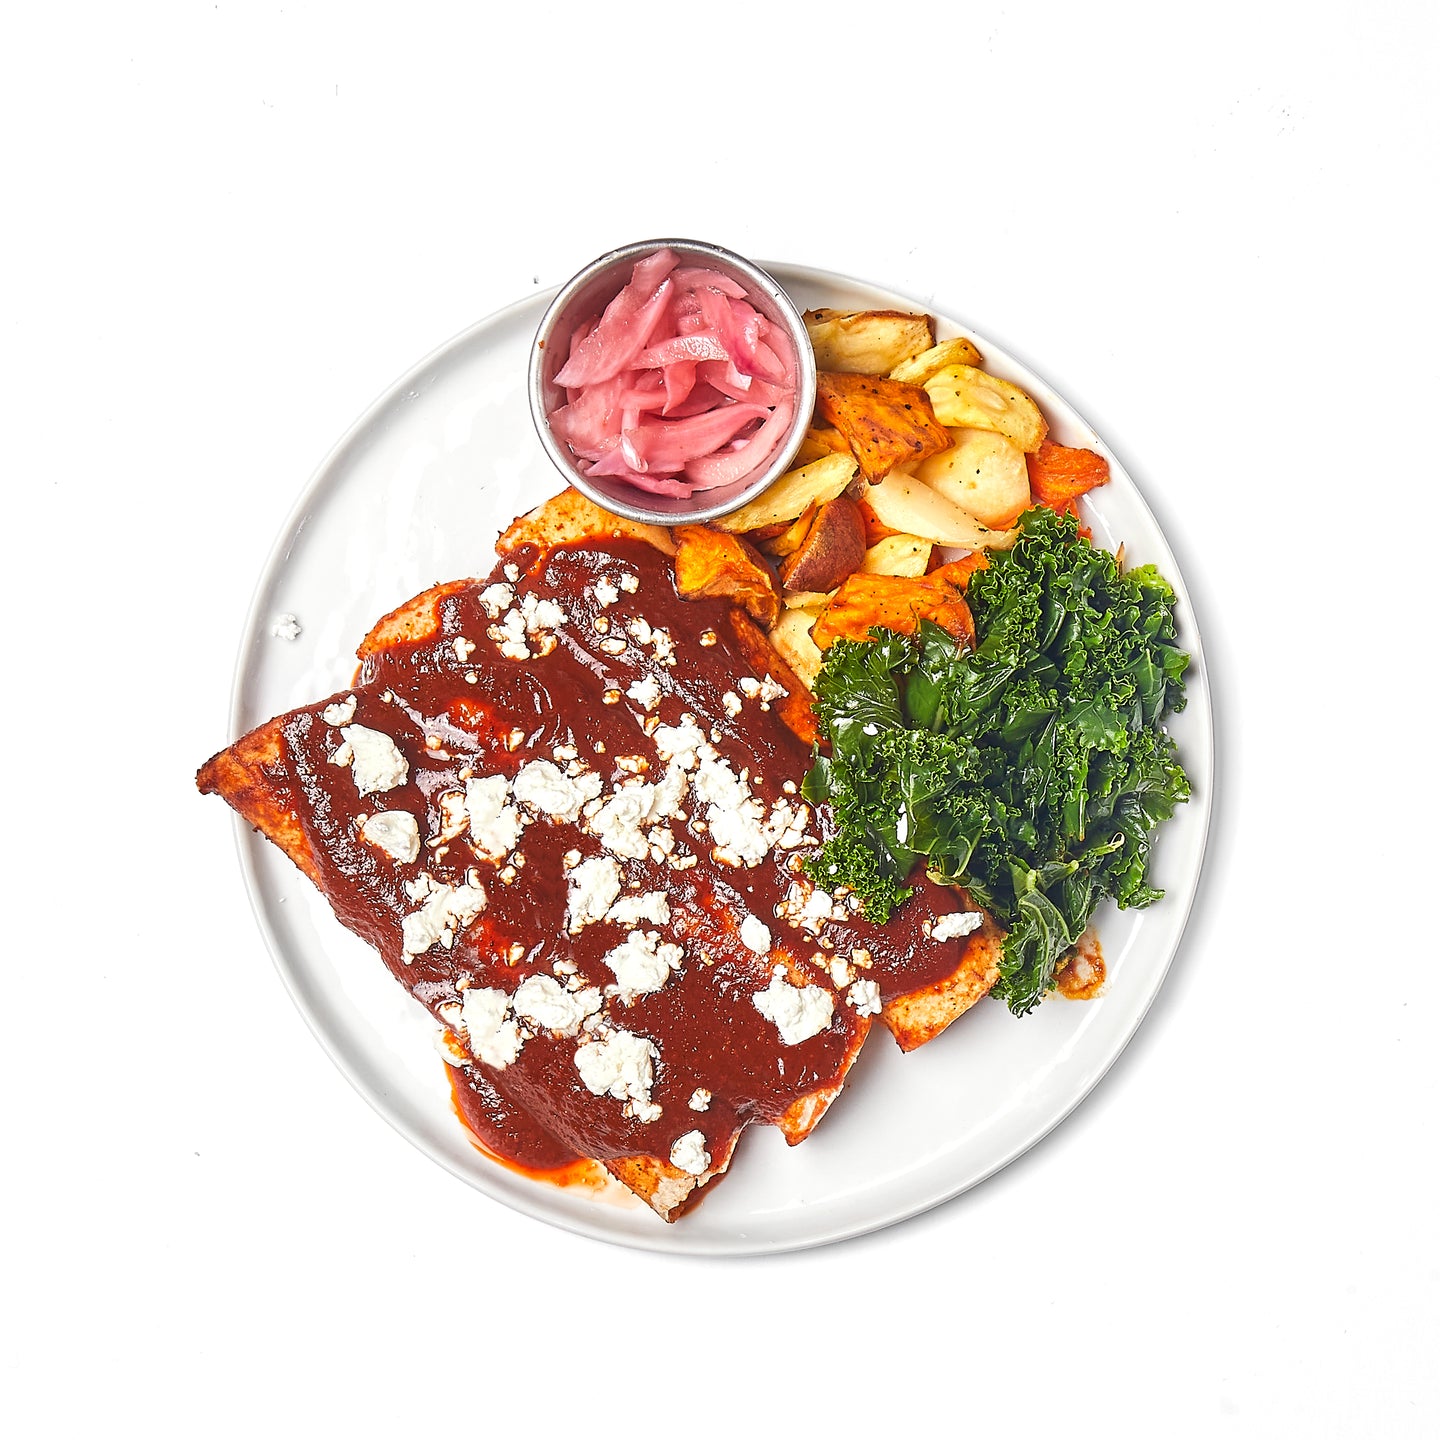 roasted pumpkin and black bean enchiladas azuluna foods Premium Pasture-Raised ready-to-eat Meals Delivery